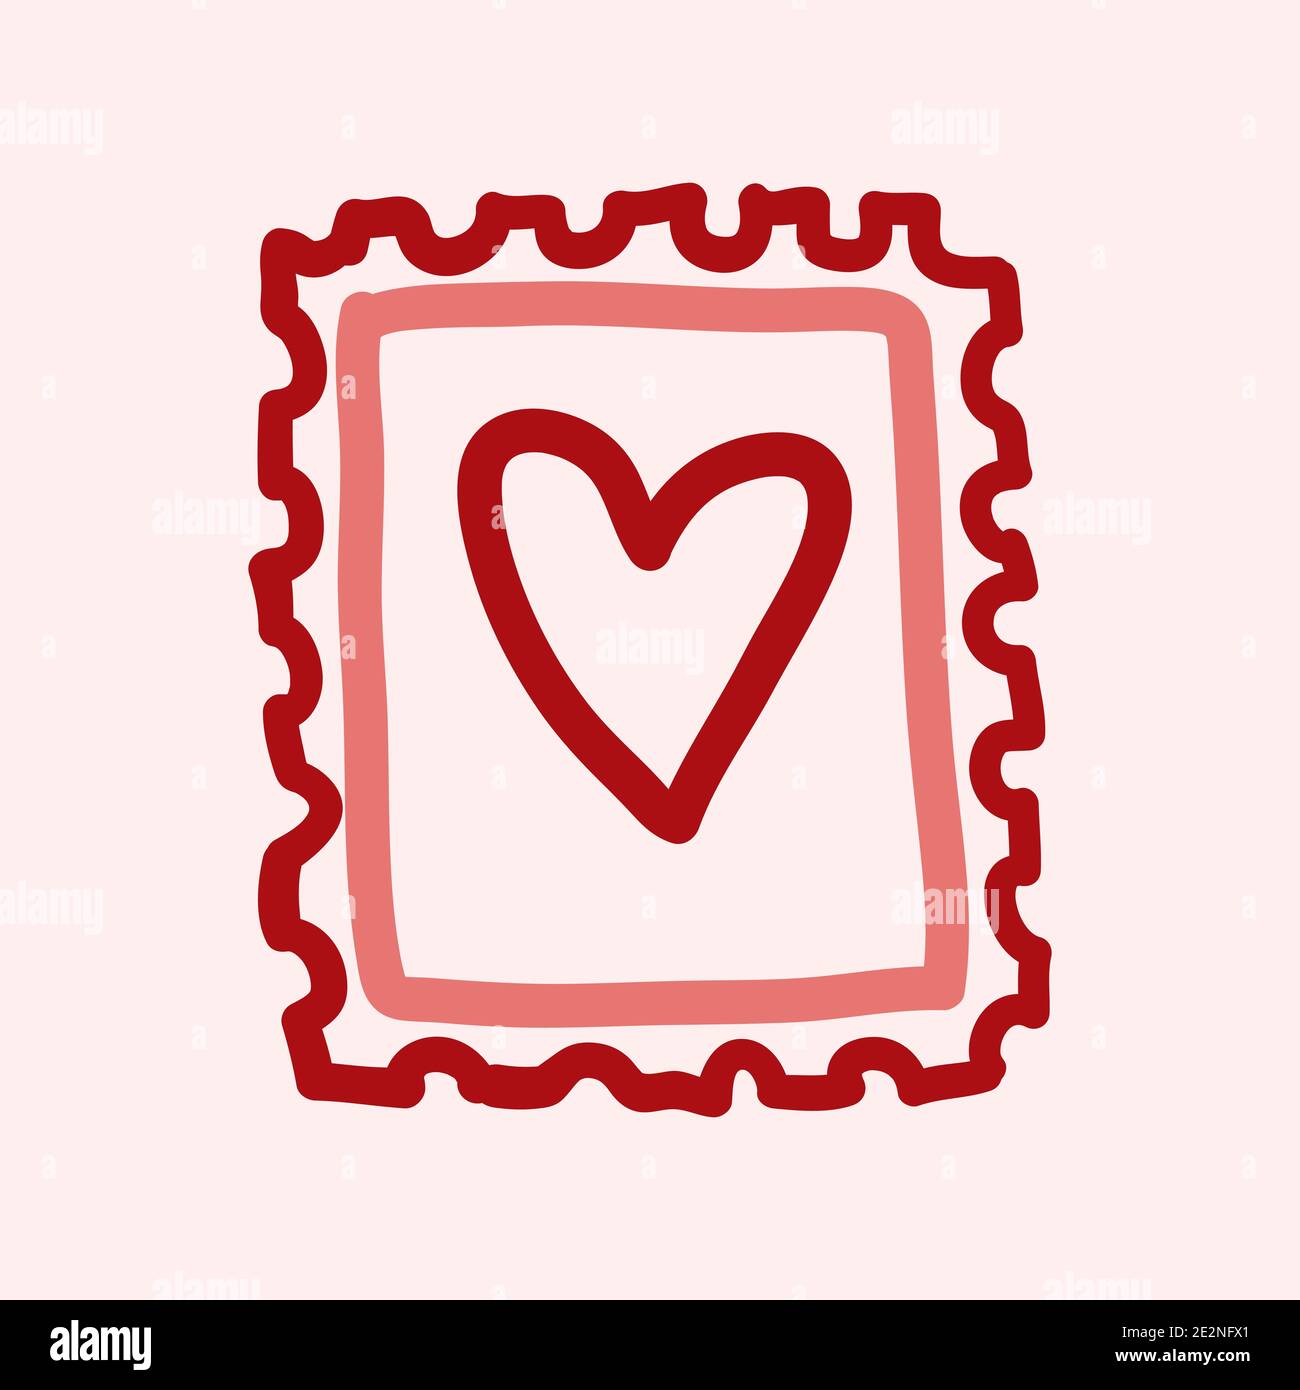 Set isolated valentines day postage stamps Vector Image